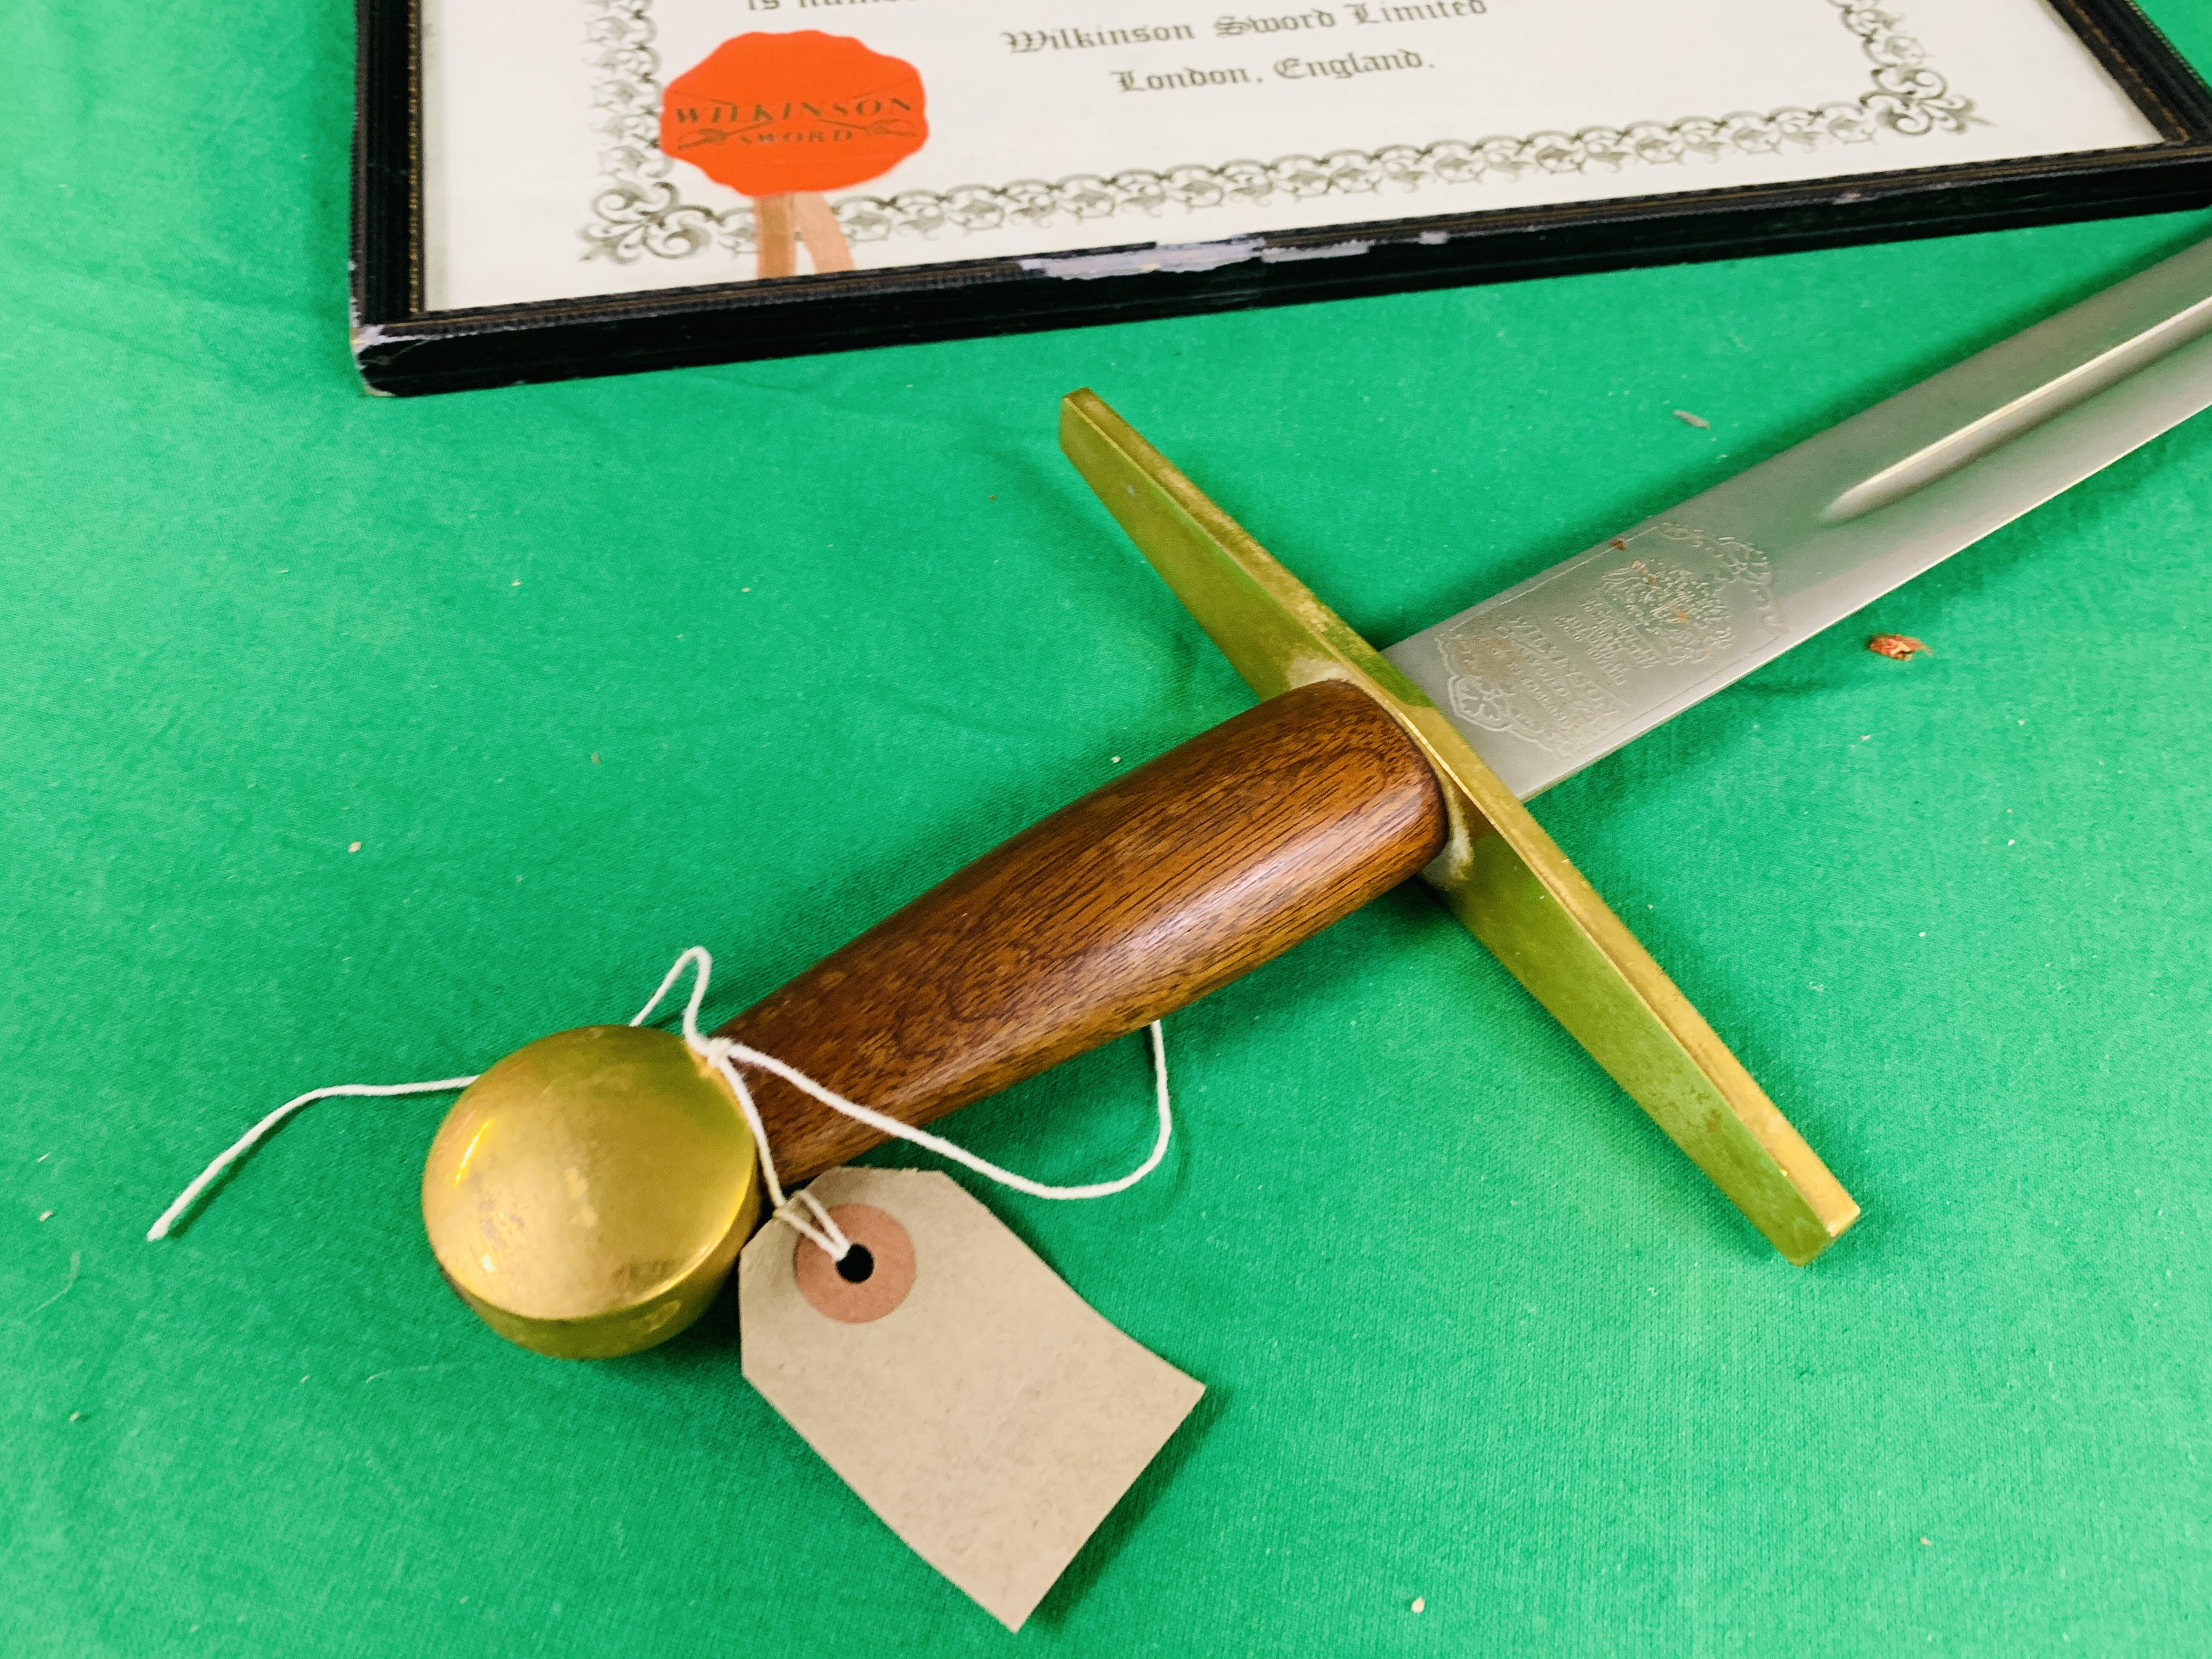 A COMMEMORATIVE WILKINSON SWORD DISPLAY PIECE FROM 1969 WITH CERTIFICATE - Image 6 of 8